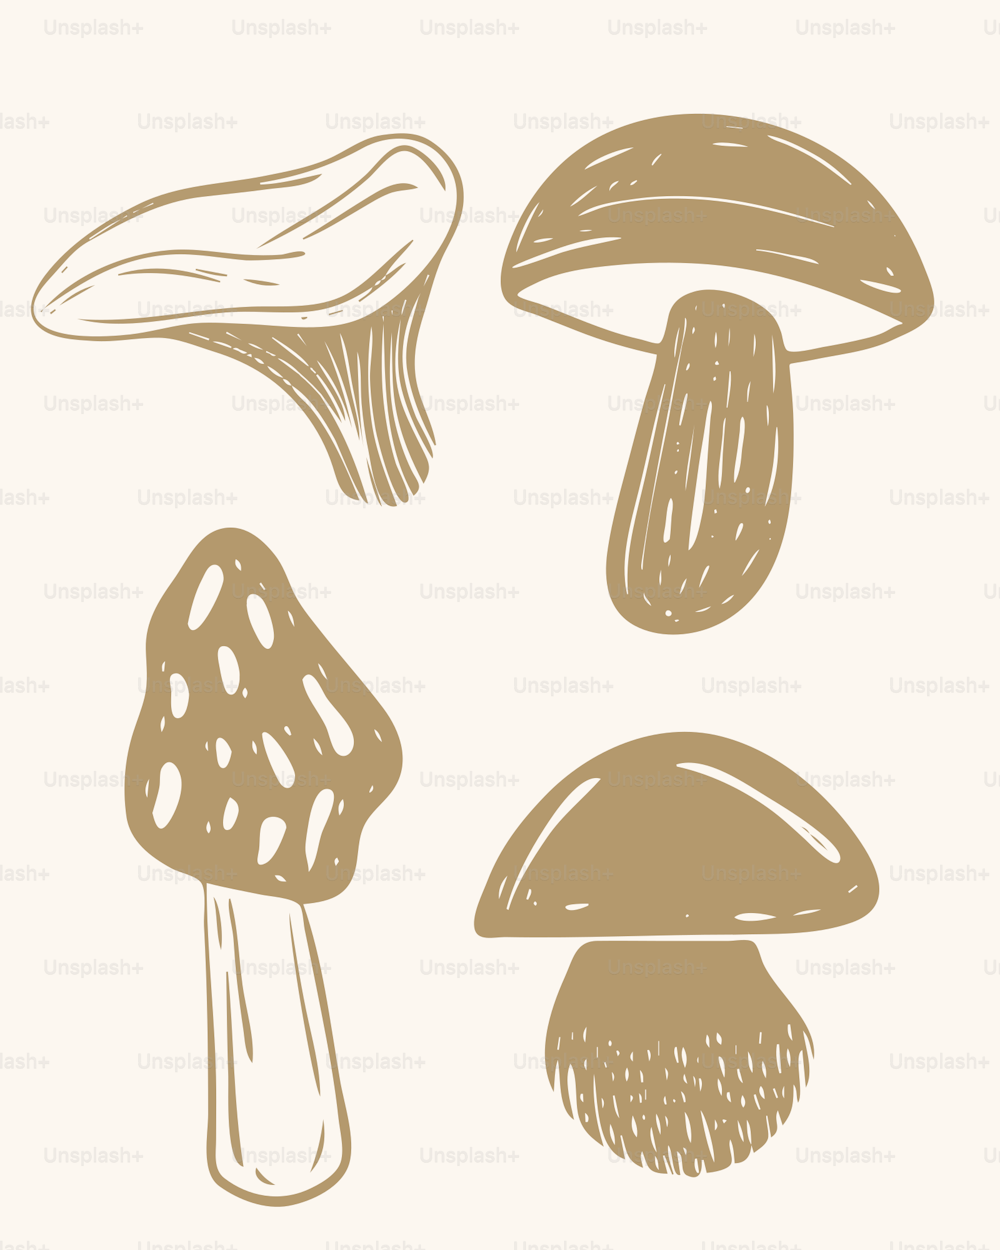 three different types of mushrooms on a white background